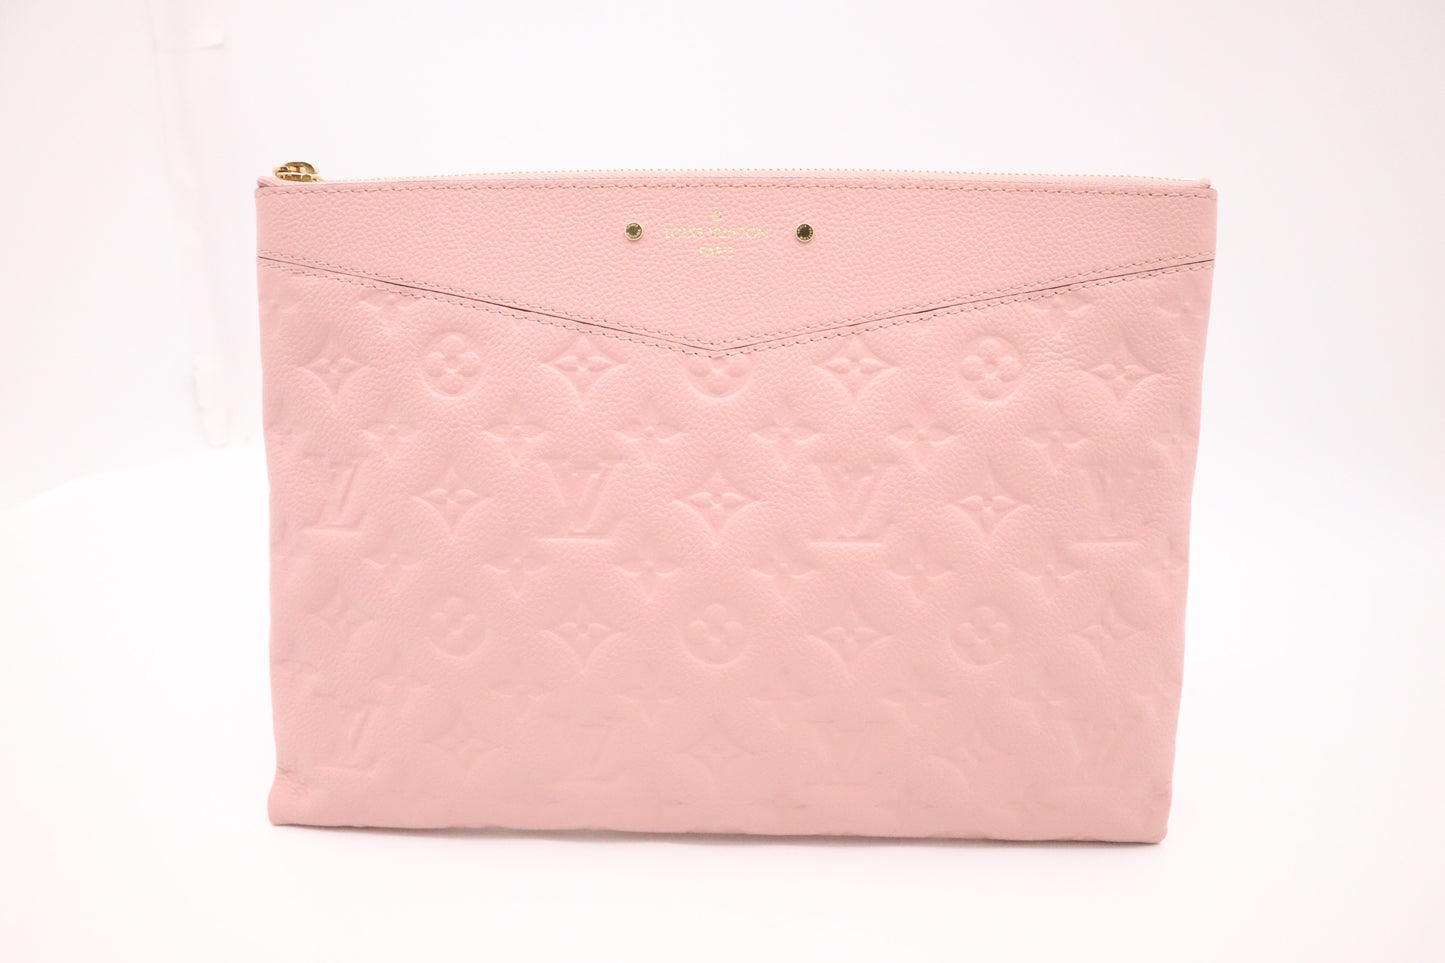 Louis Vuitton Daily Pouch in Pink Empreinte Leather